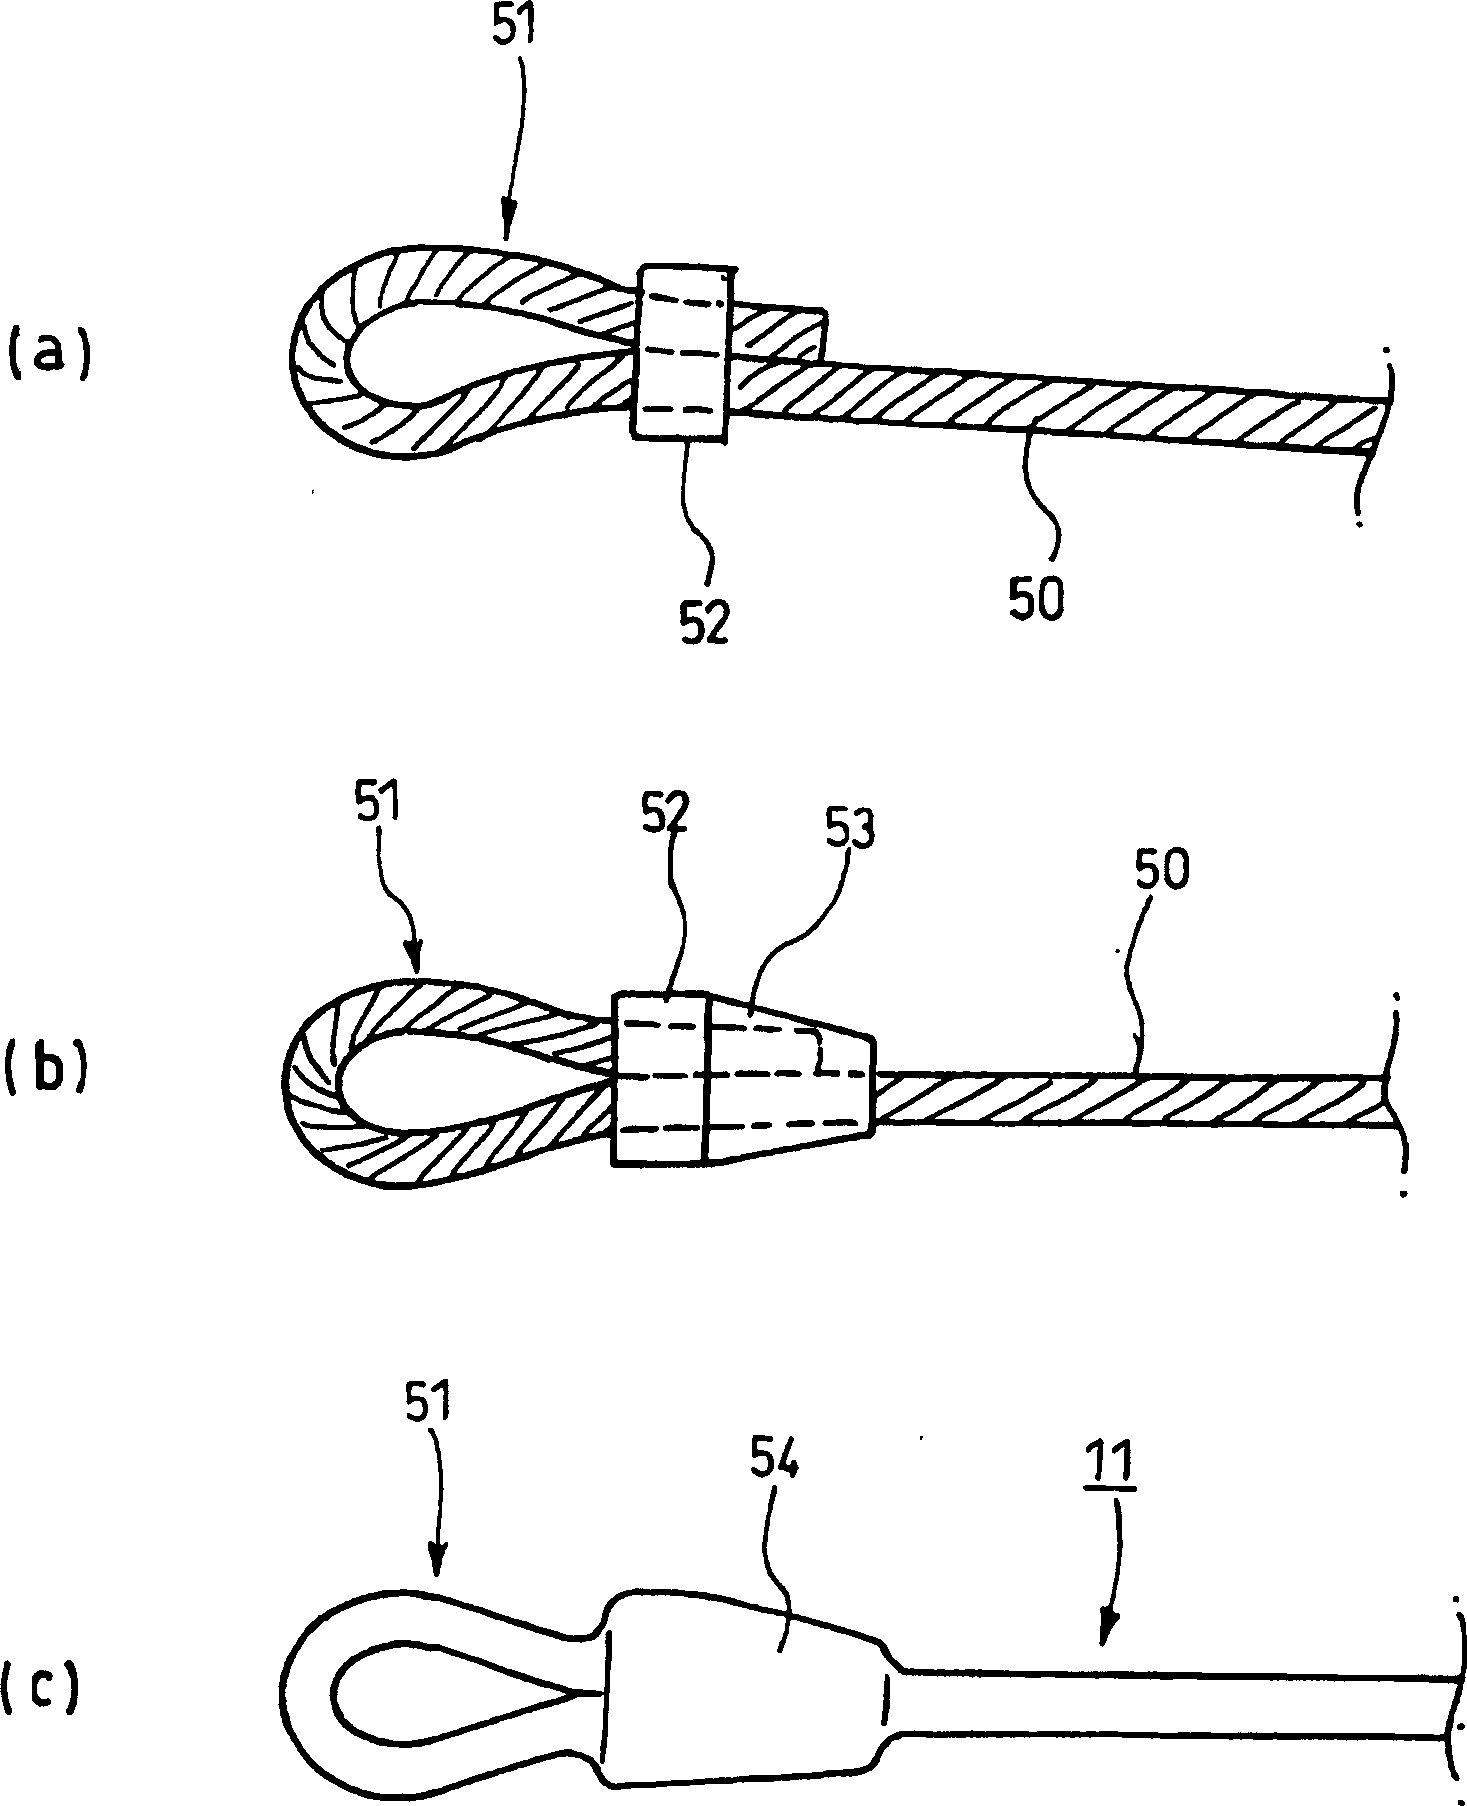 Method of inserting wire in rubber sleeving and rubber sleeving expander